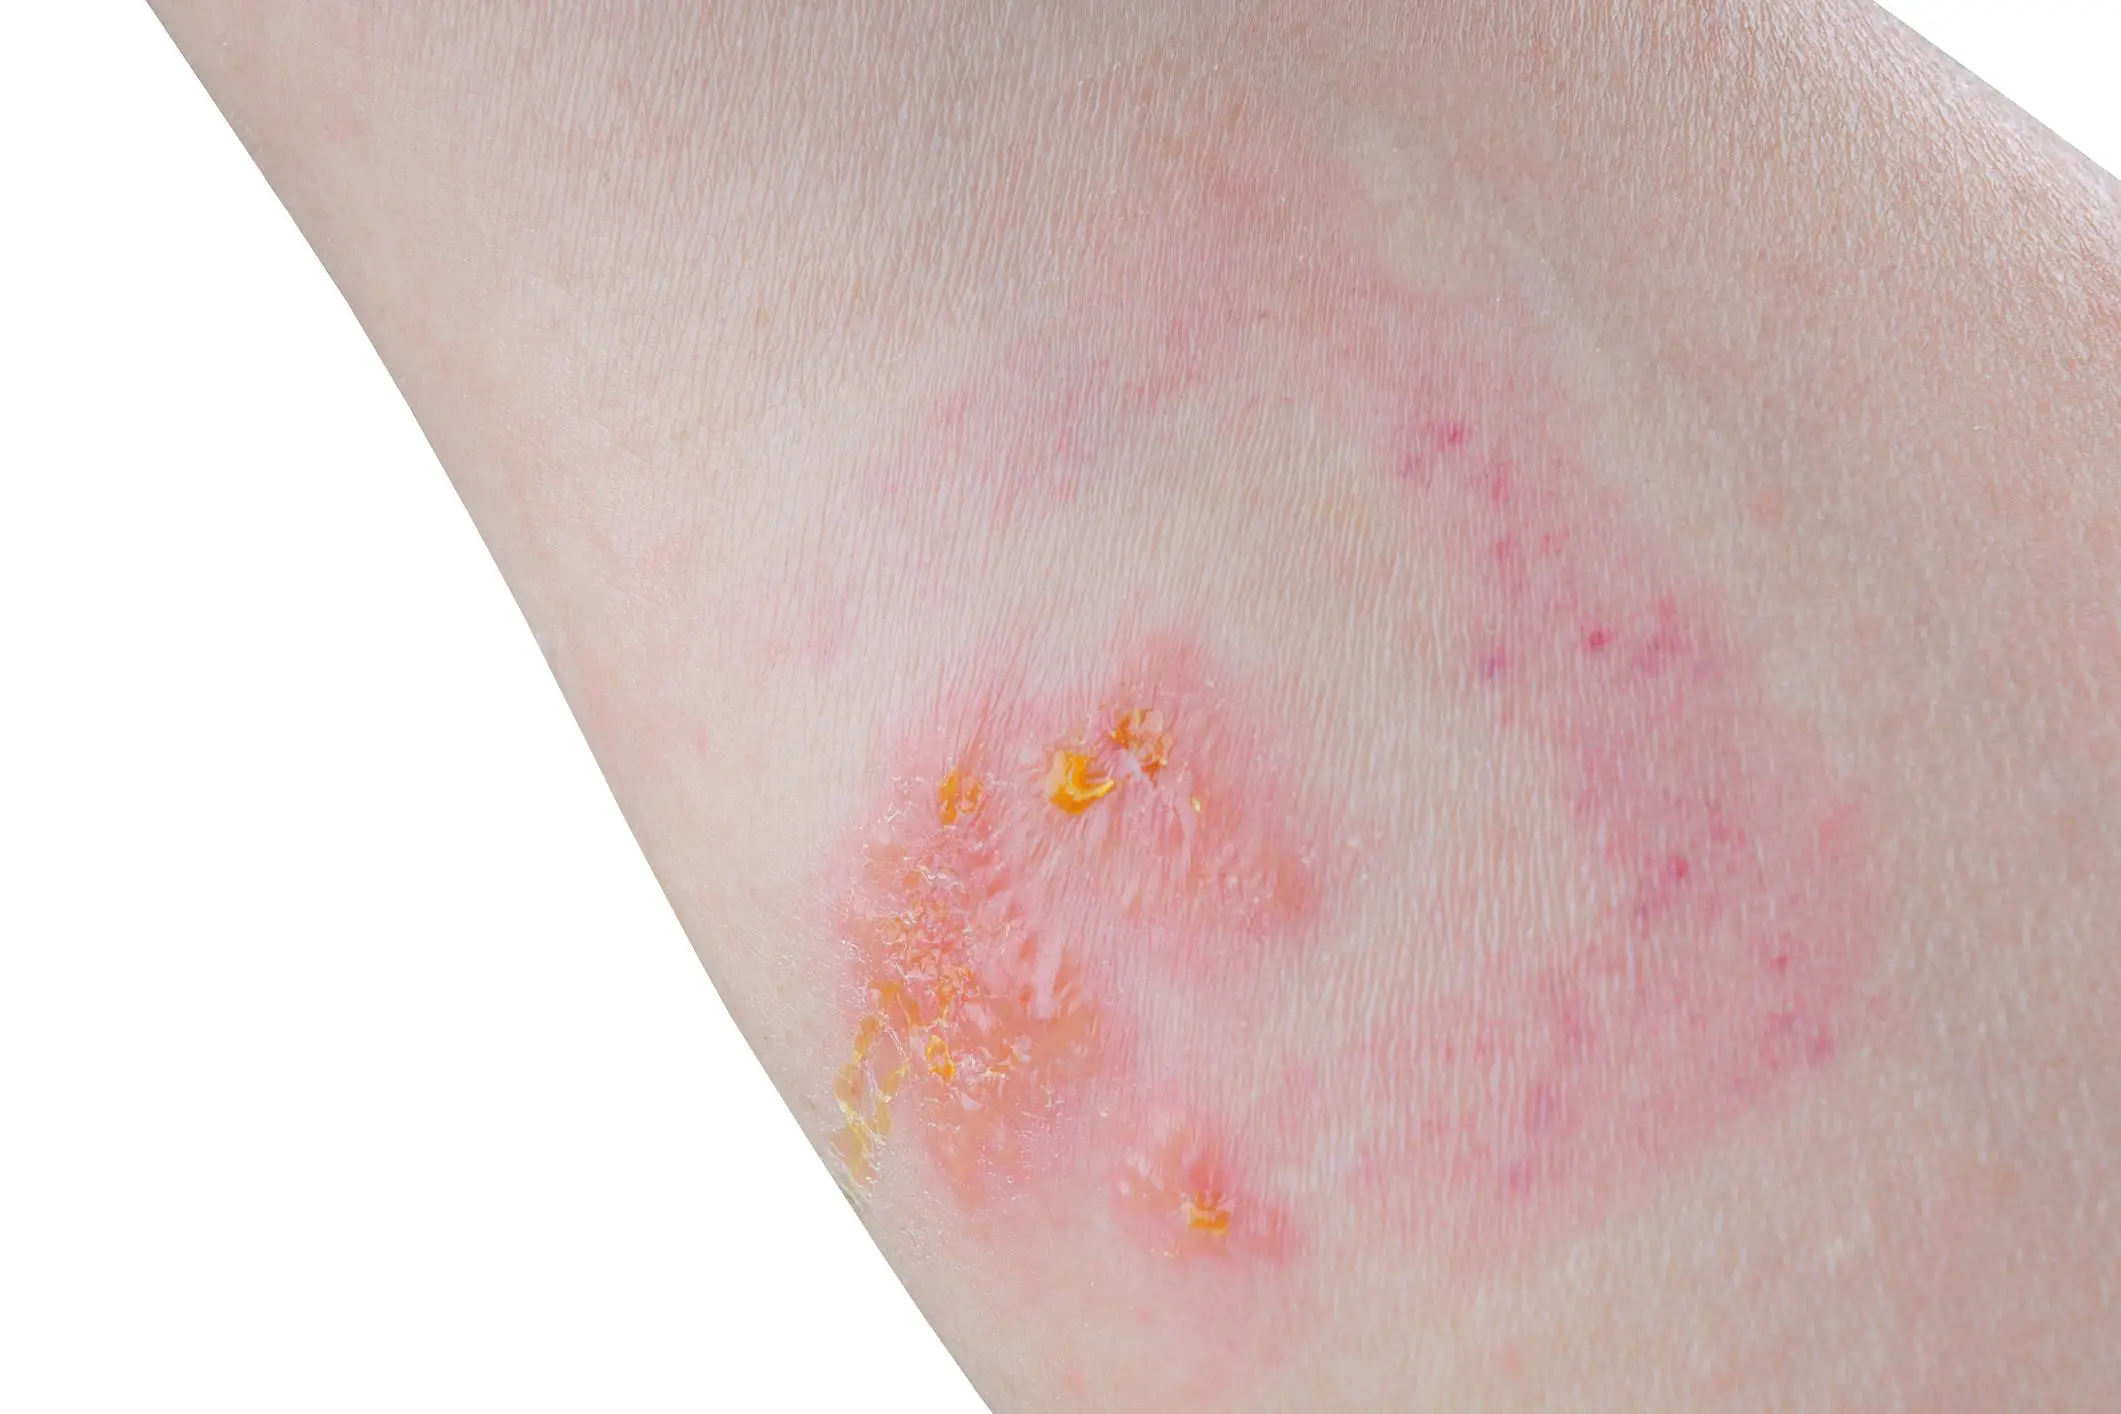 A person infected by Poison ivy and subsequently suffering from an uncomfortable rash